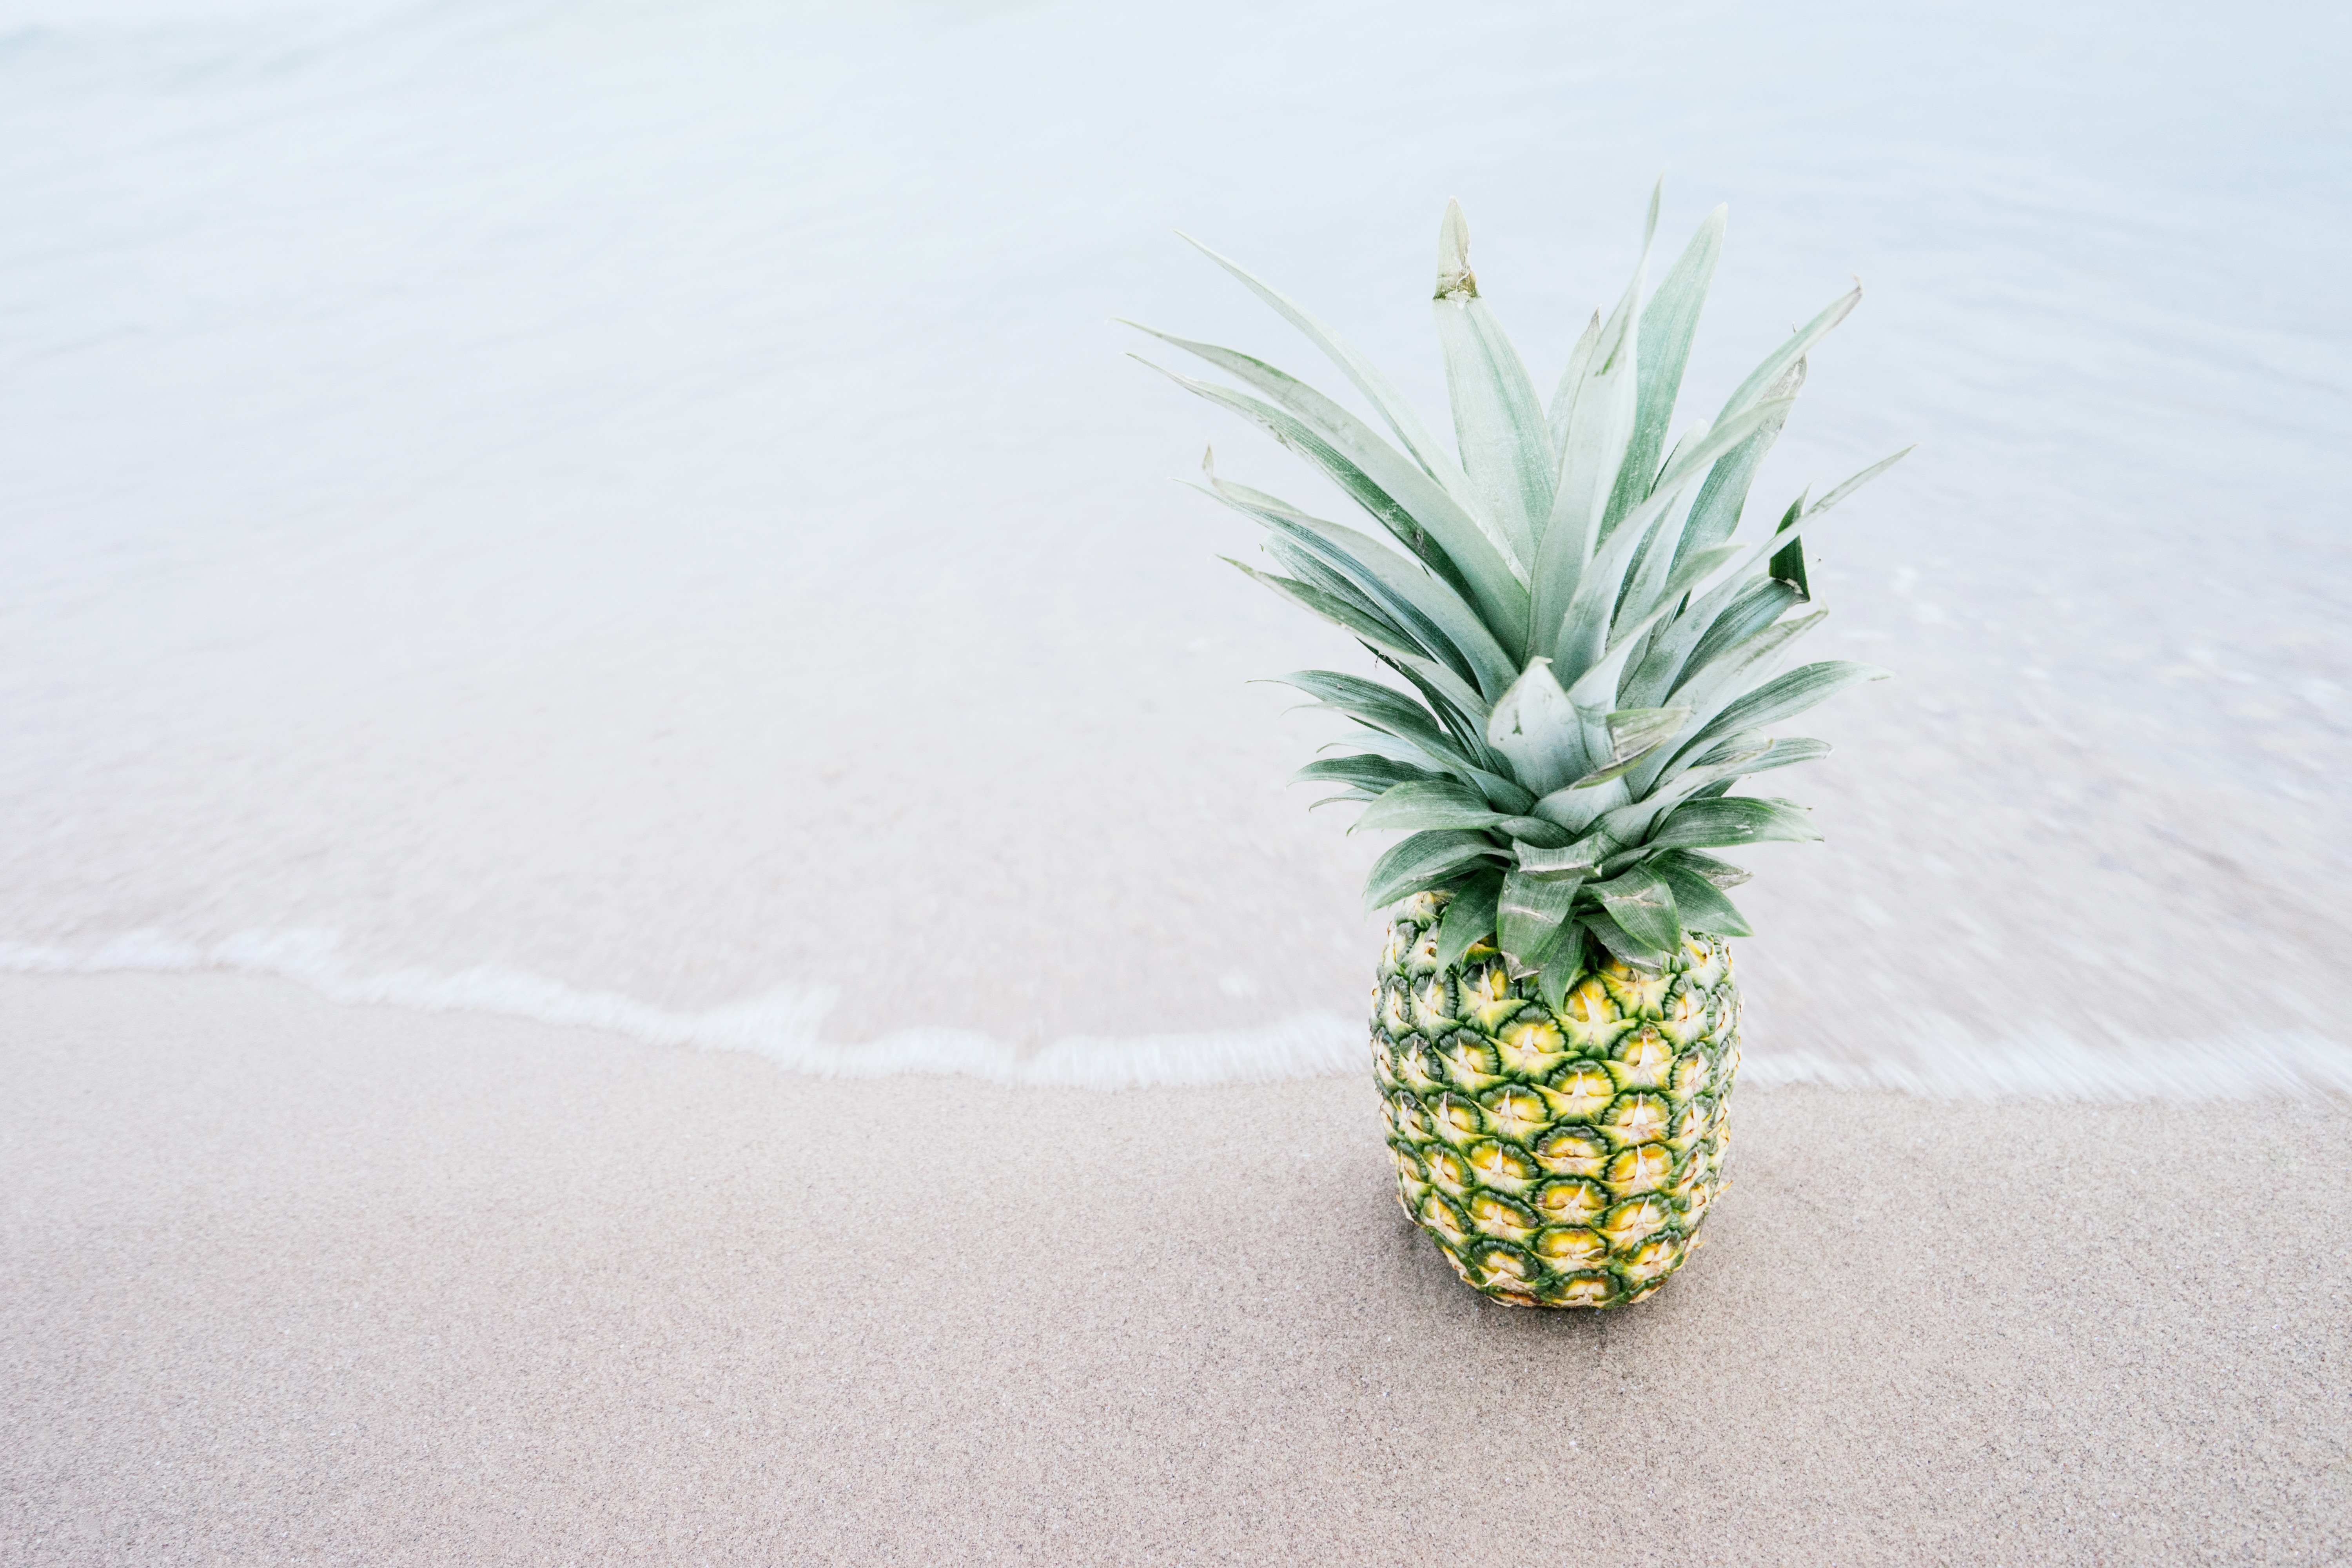 Free photo A pineapple on the seashore is washed by the waves